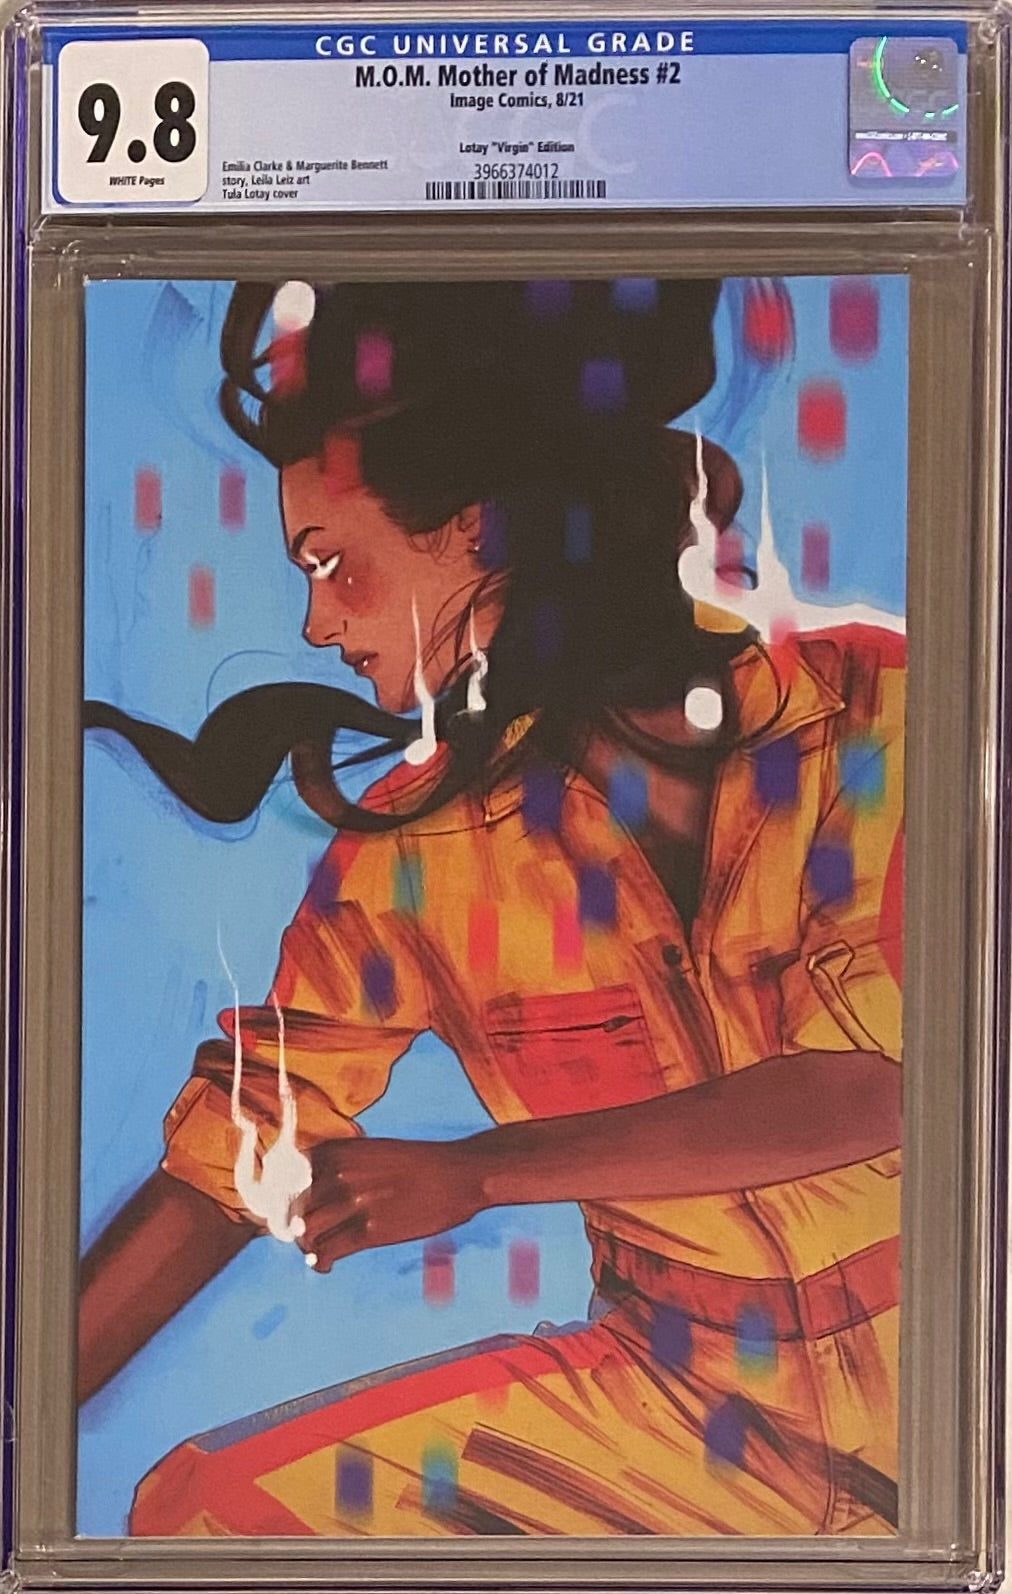 MOM Mother of Madness #2 Lotay 1:50 Virgin Retailer Incentive Variant CGC 9.8